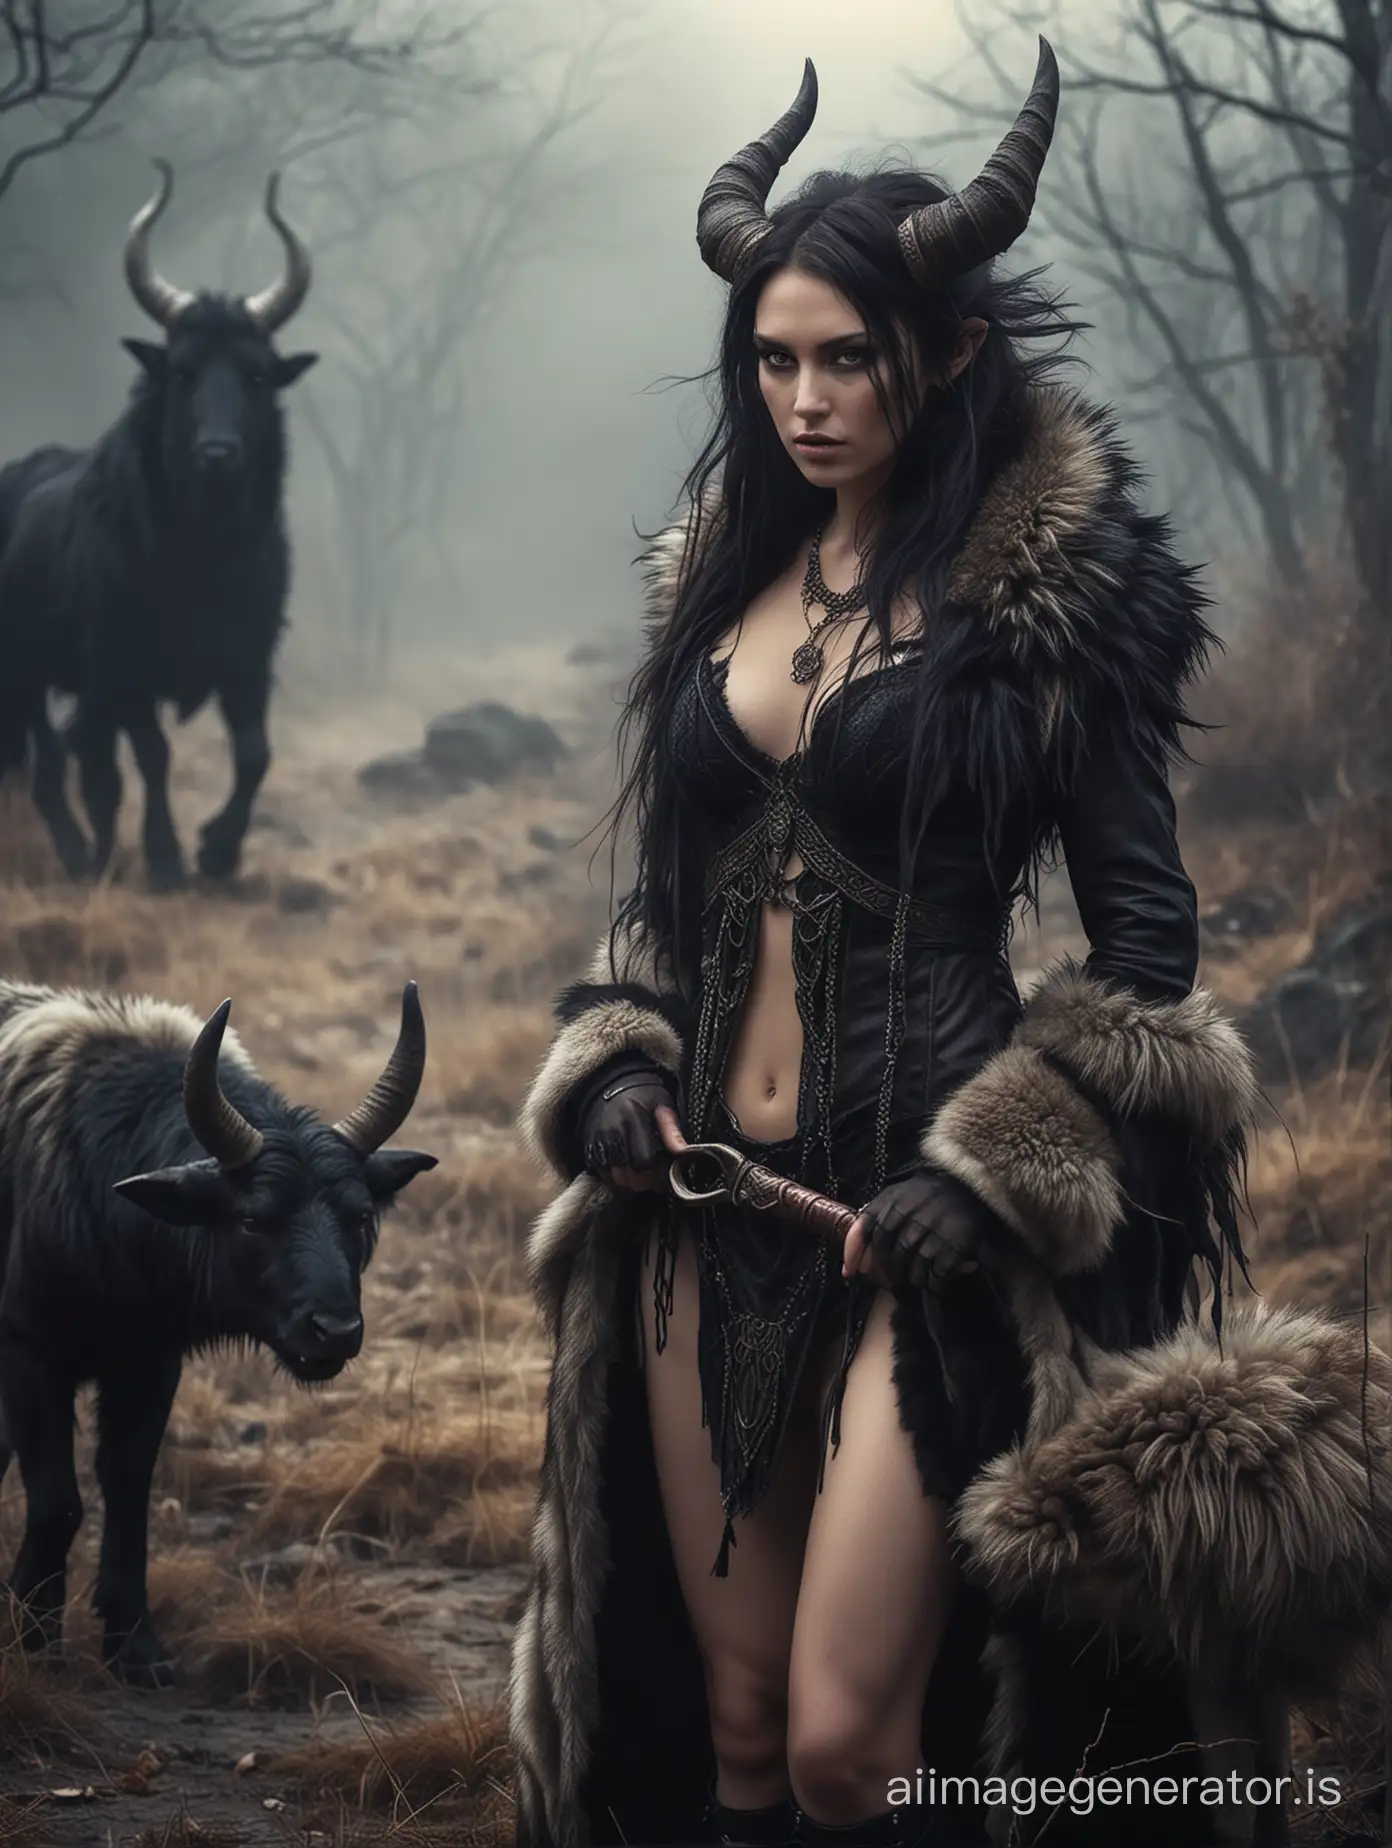 The female druid (NO HORNS) hunting, her animal companion by her side, scantily dressed in an outfit of furs, realistic photograph. Dark fantasy like landscape. Demons fighting in the background.